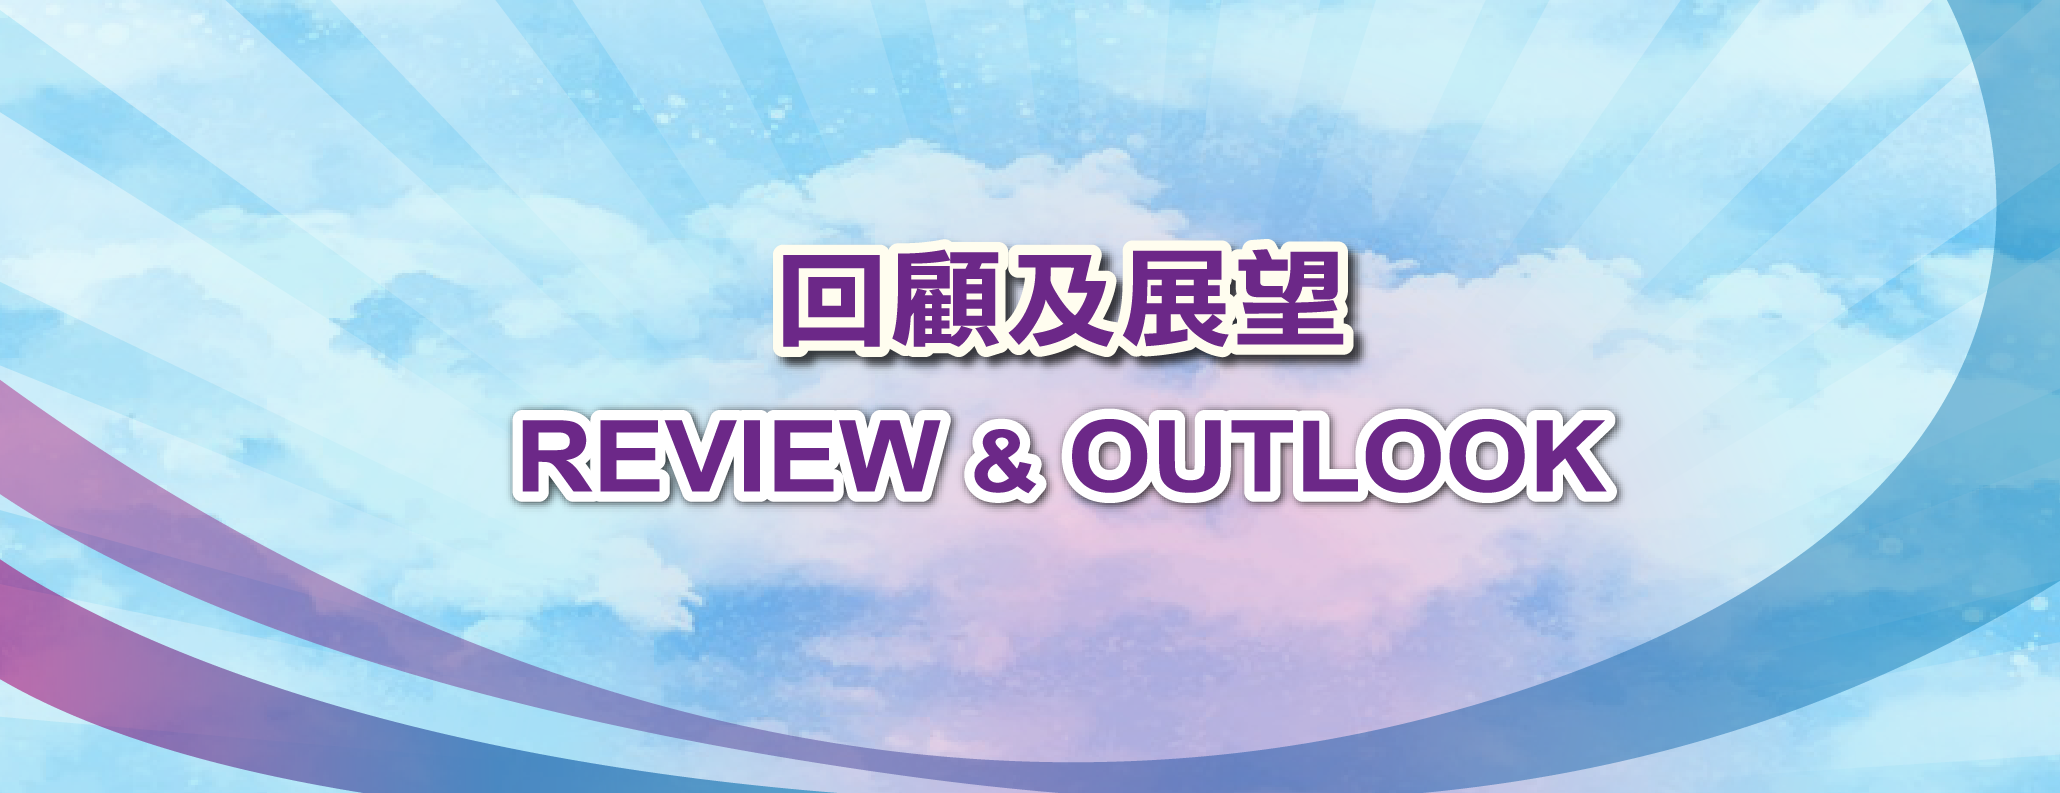 Review & Outlook